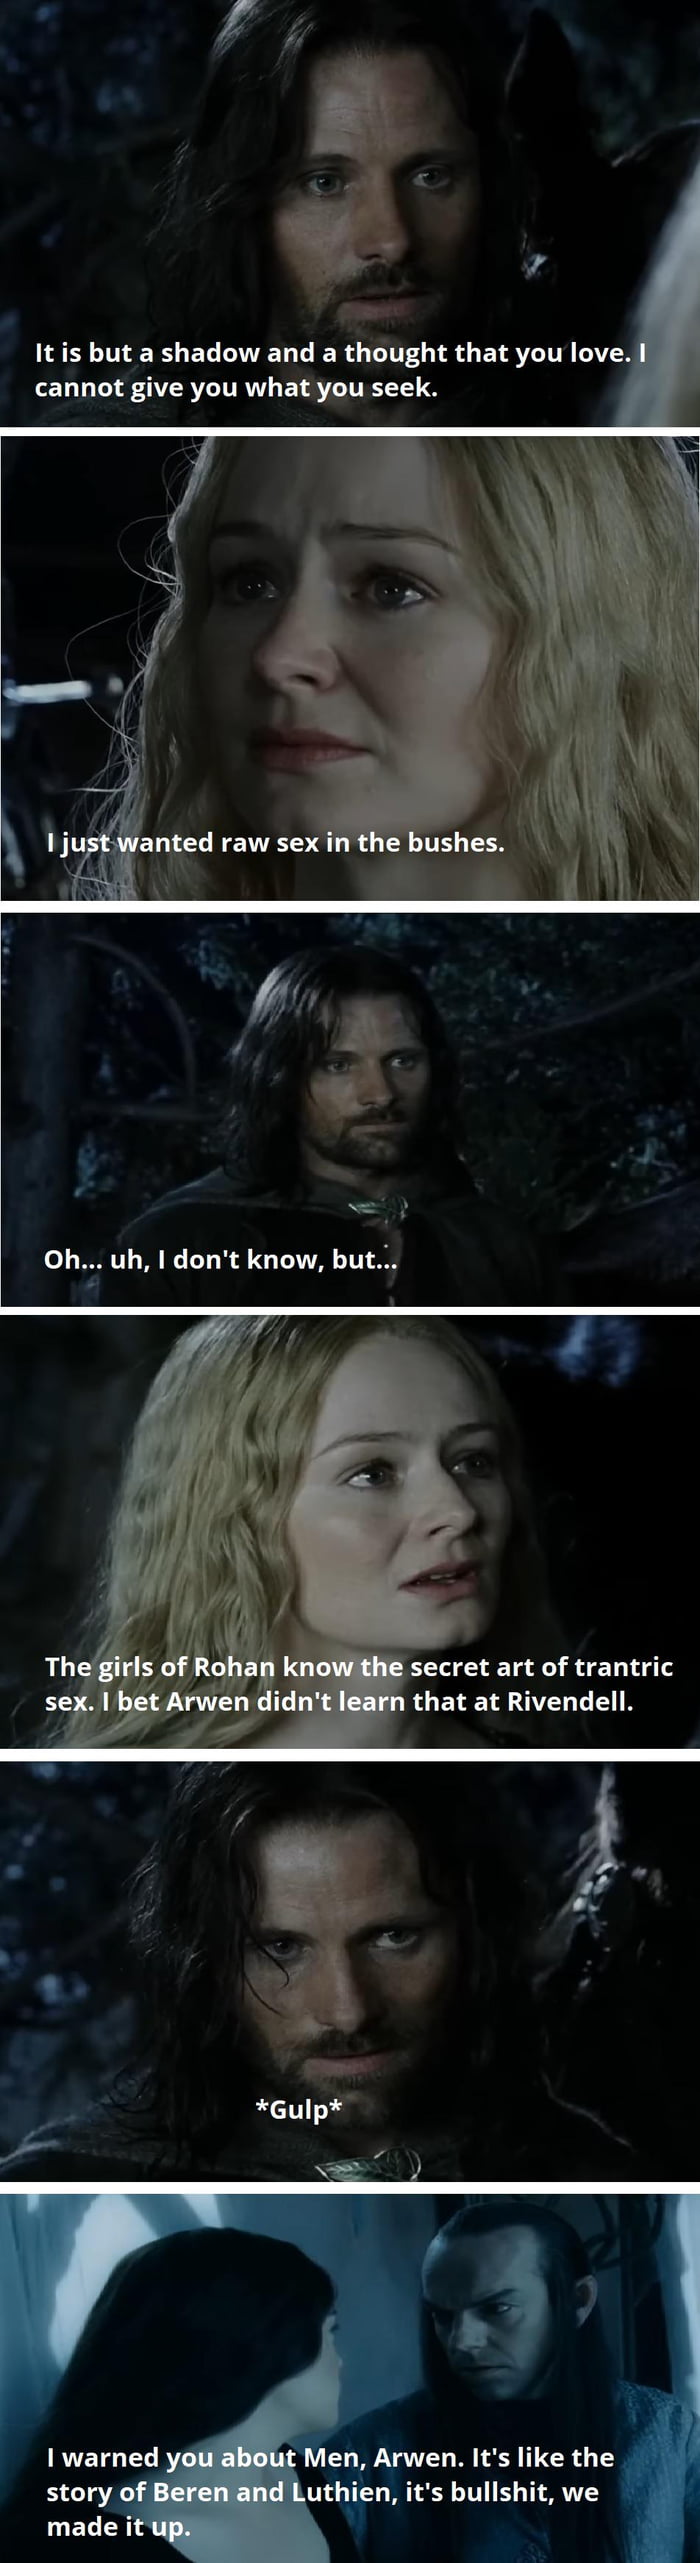 Eowyn finally managed to convince Aragorn